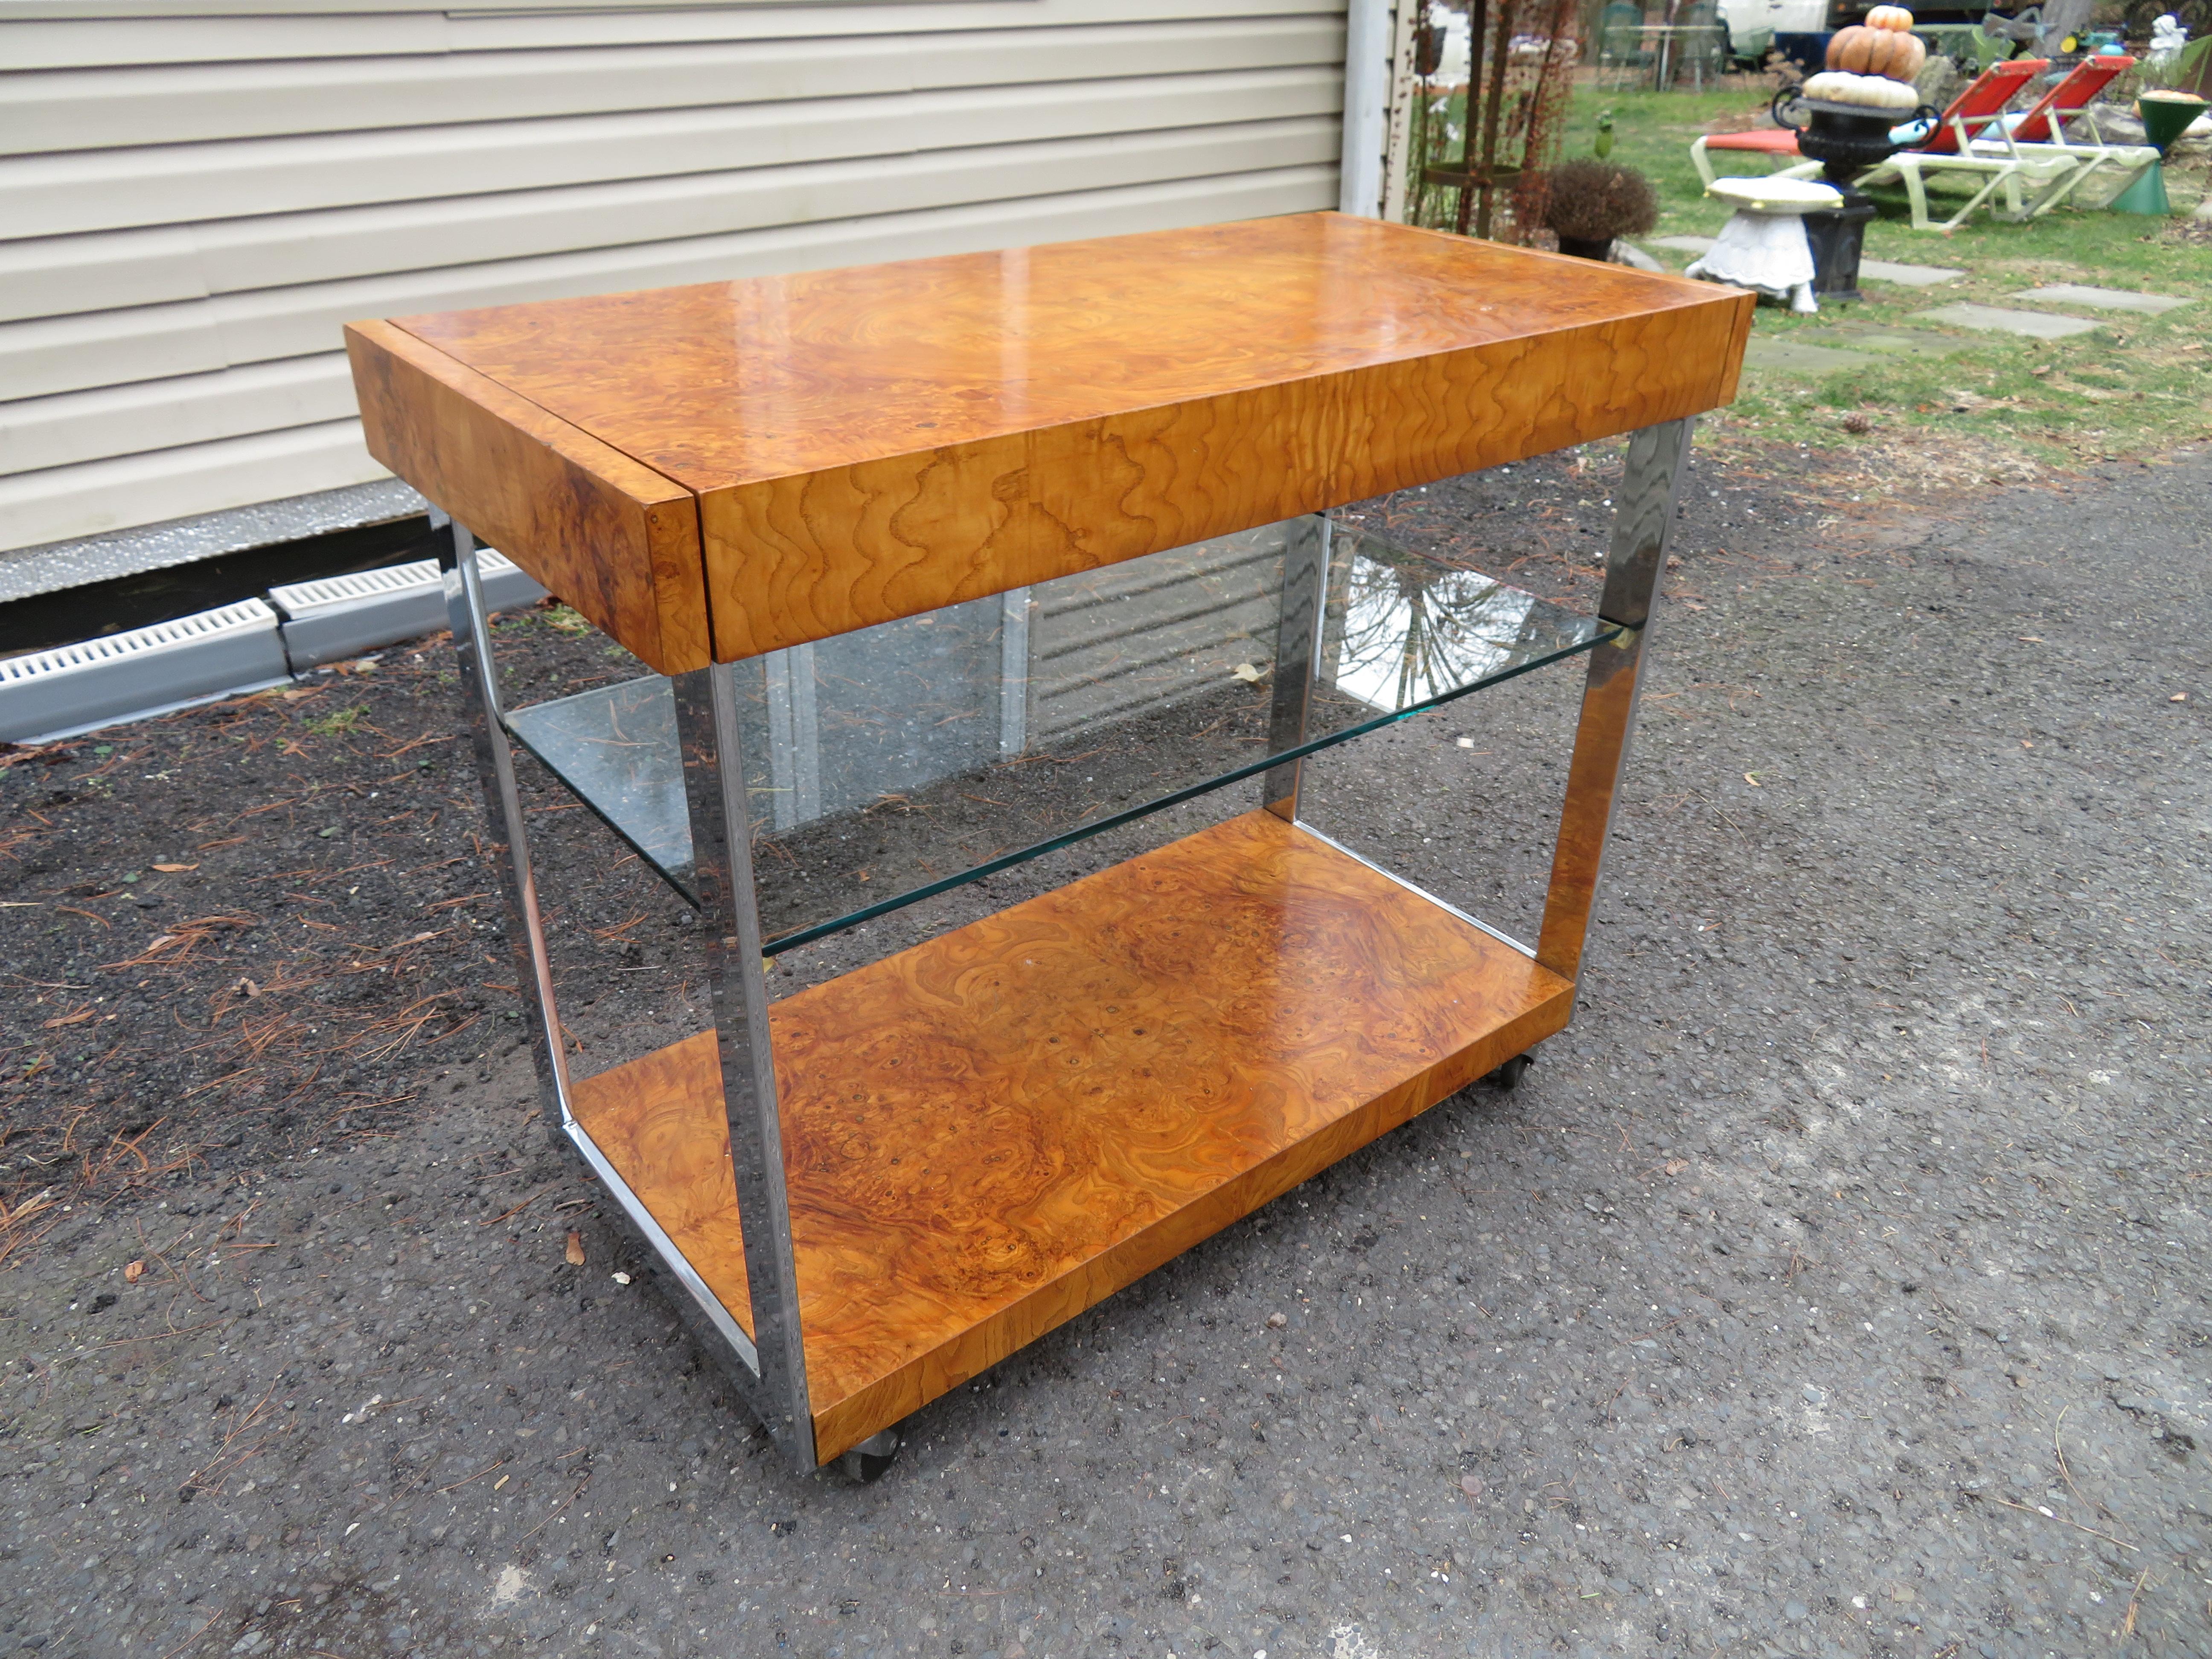 This is a beautiful bar cart in chrome and burl wood in the style of Milo Baughman. It is part of the Alpha II by Lane circa 1975. Veneer burl wood shelves are connected to polished chrome flat bars. The cart or trolley is supported by castors and